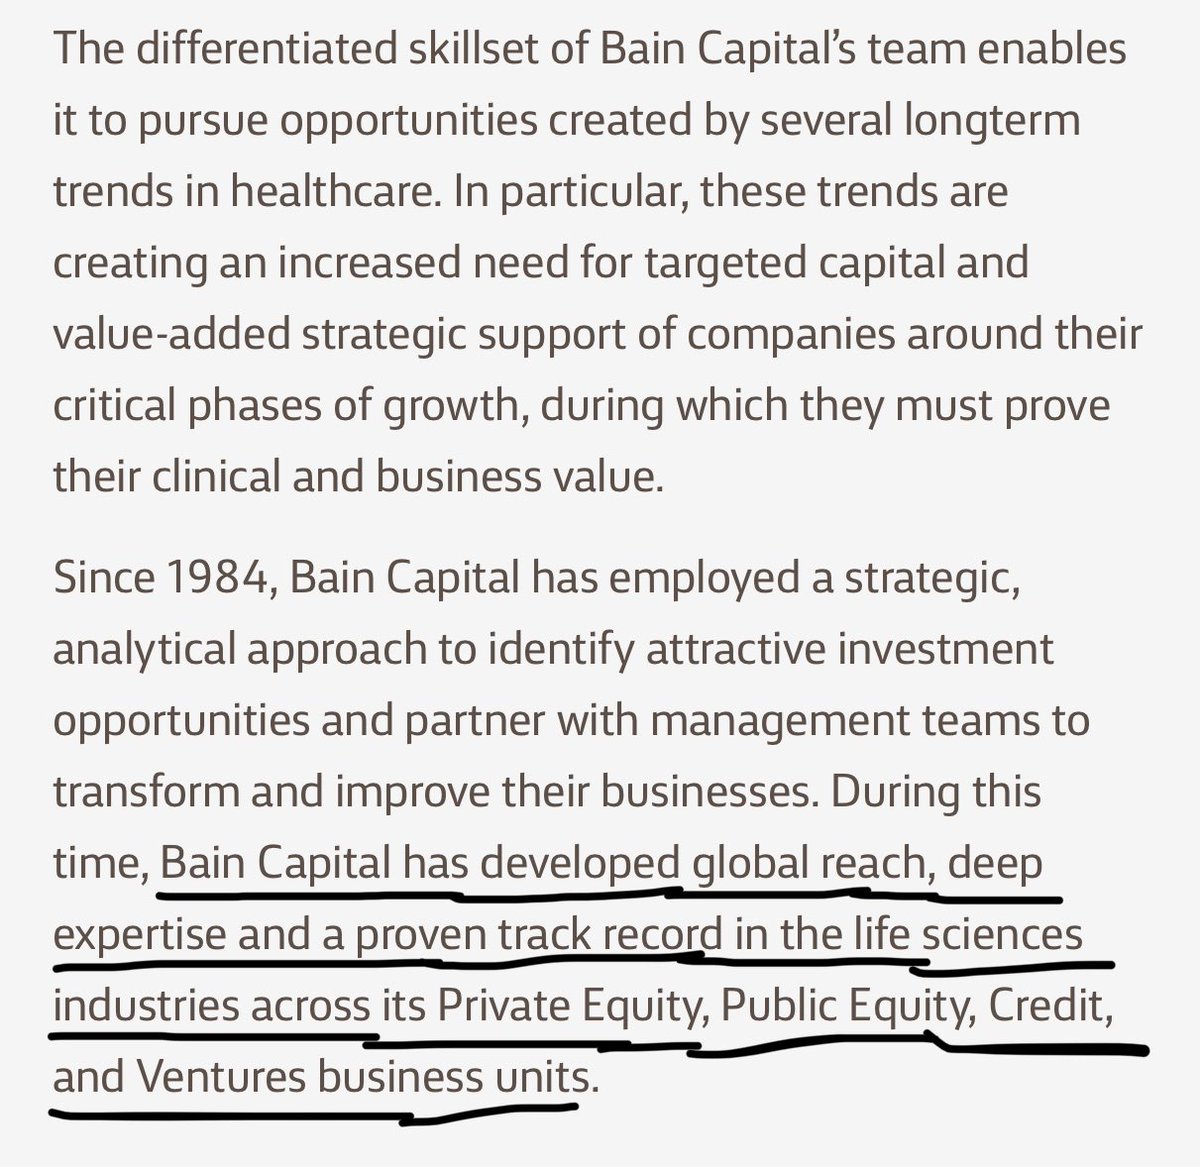 The capital group has the same focus as the SPAC. Bain has deep expertise, global reach, and a proven track record in private equity, public equity (more on that in a few tweets), credit, and venture investments. https://www.baincapital.com/businesses/scaling-innovation-life-sciences  $BLSA